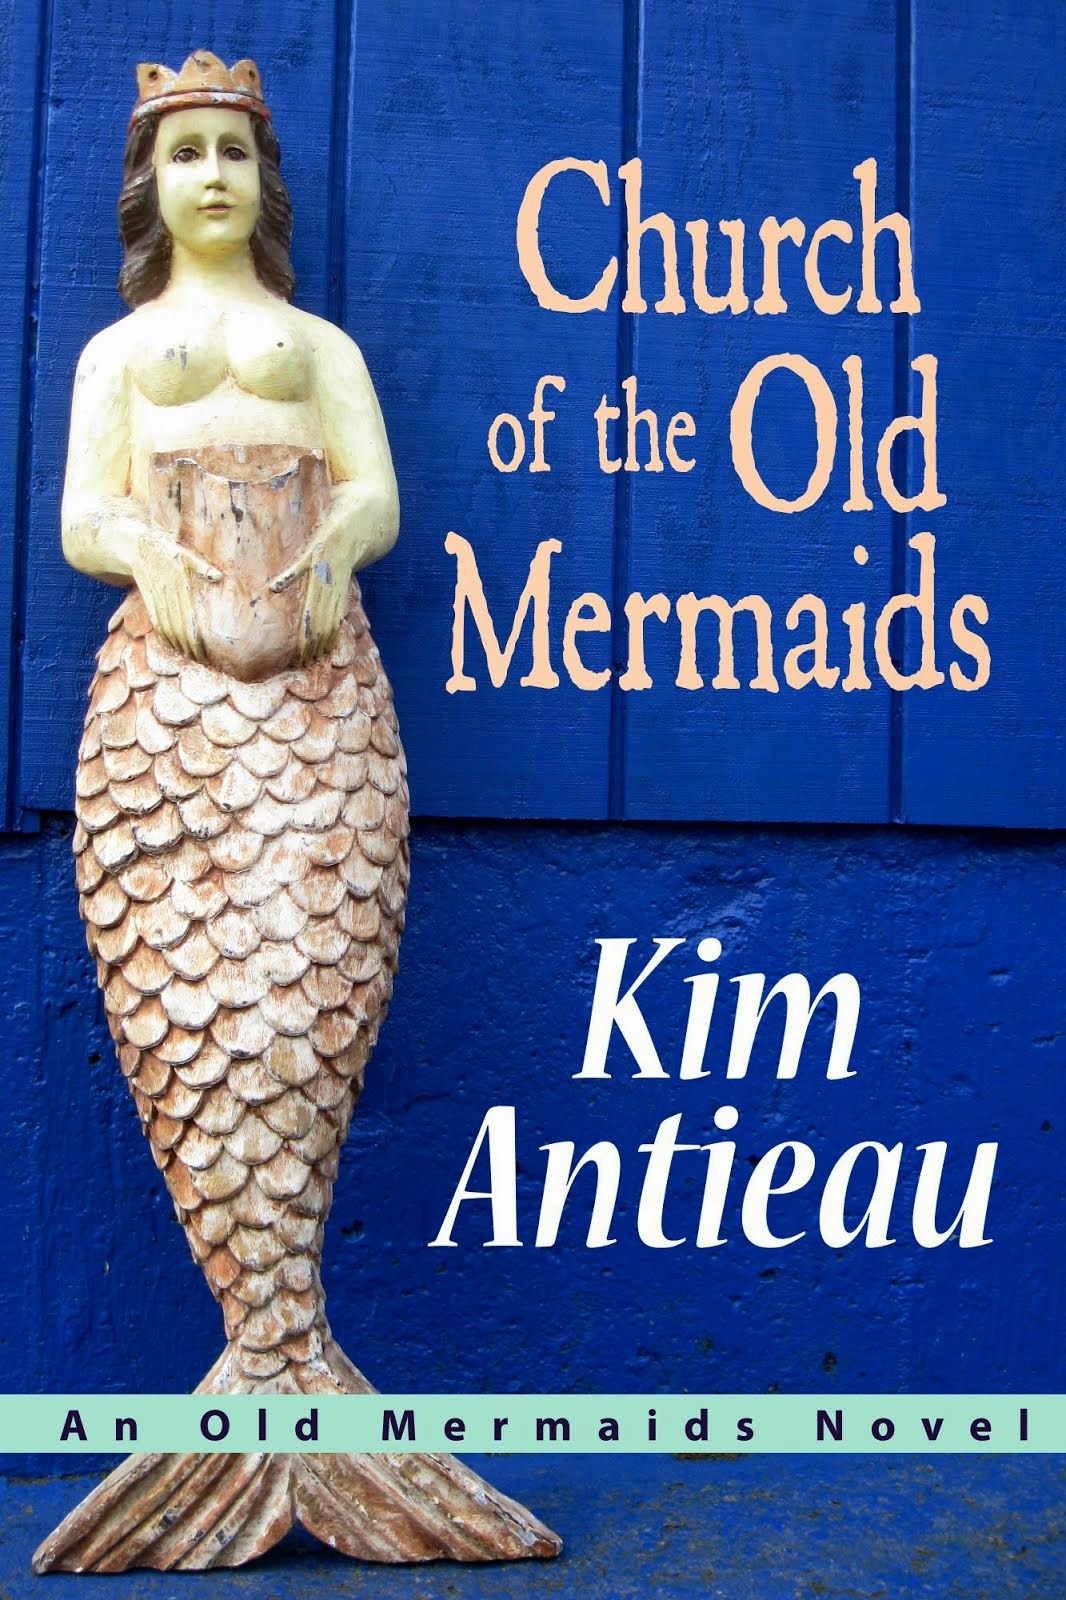 Church of the Old Mermaids